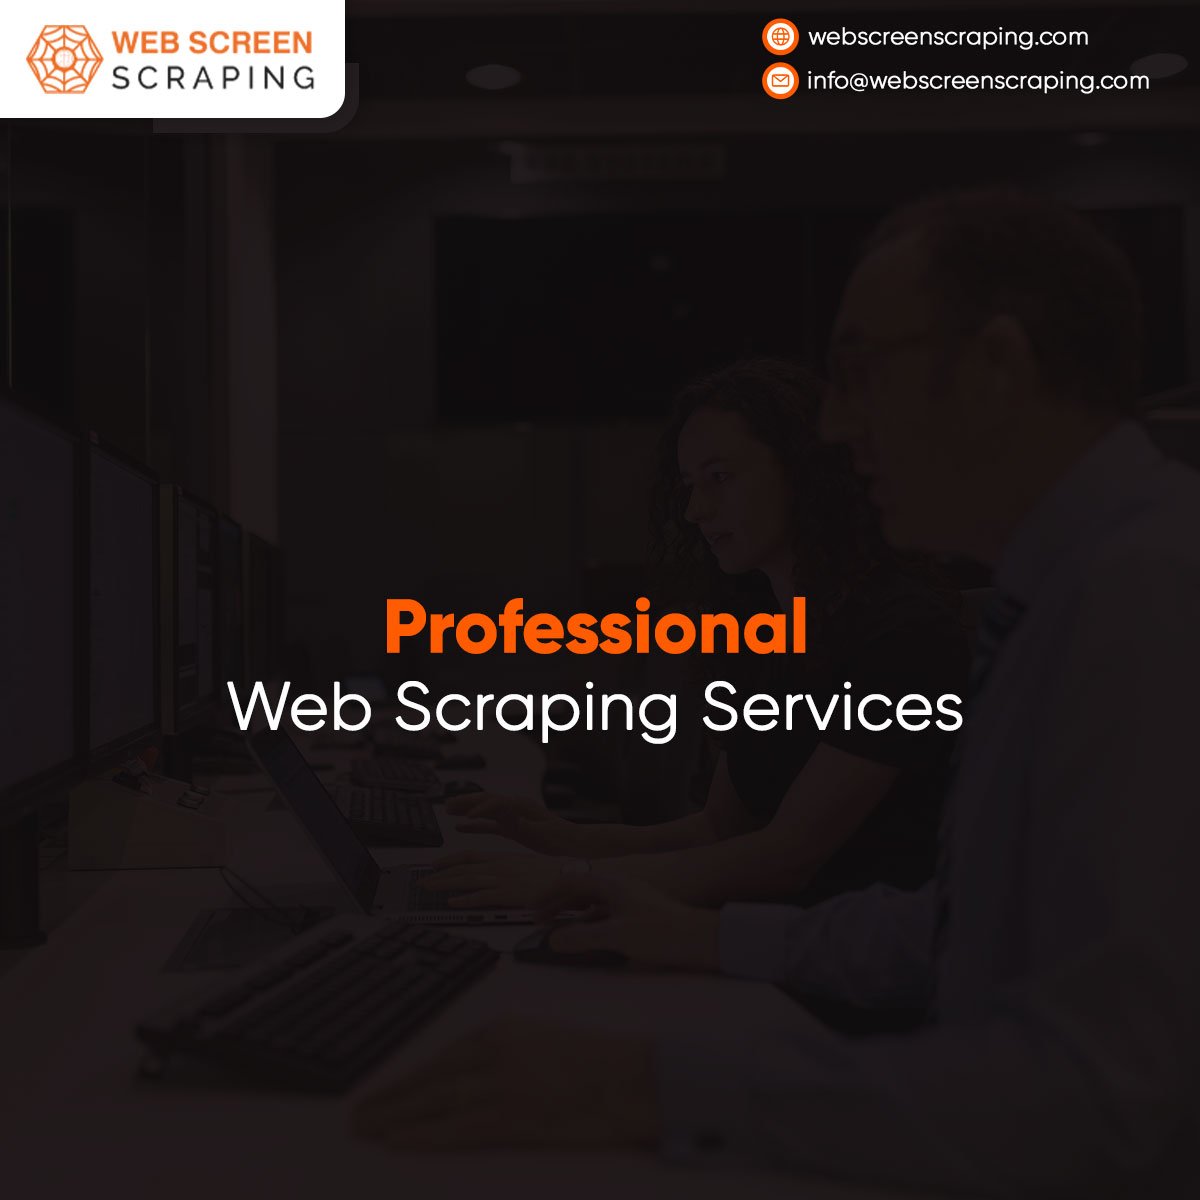 Worlds Best Professional Web Data Scraping Services Provider in USA, Australia, Germany, UAE, and Denmark
webscreenscraping.com/professional-w…

#ProfessionalWebDataScraping #BestWebDataScraping #DataScrapingServices #WebScrapingServices #WebScraping #WebsiteScraping #WebScreenScraping